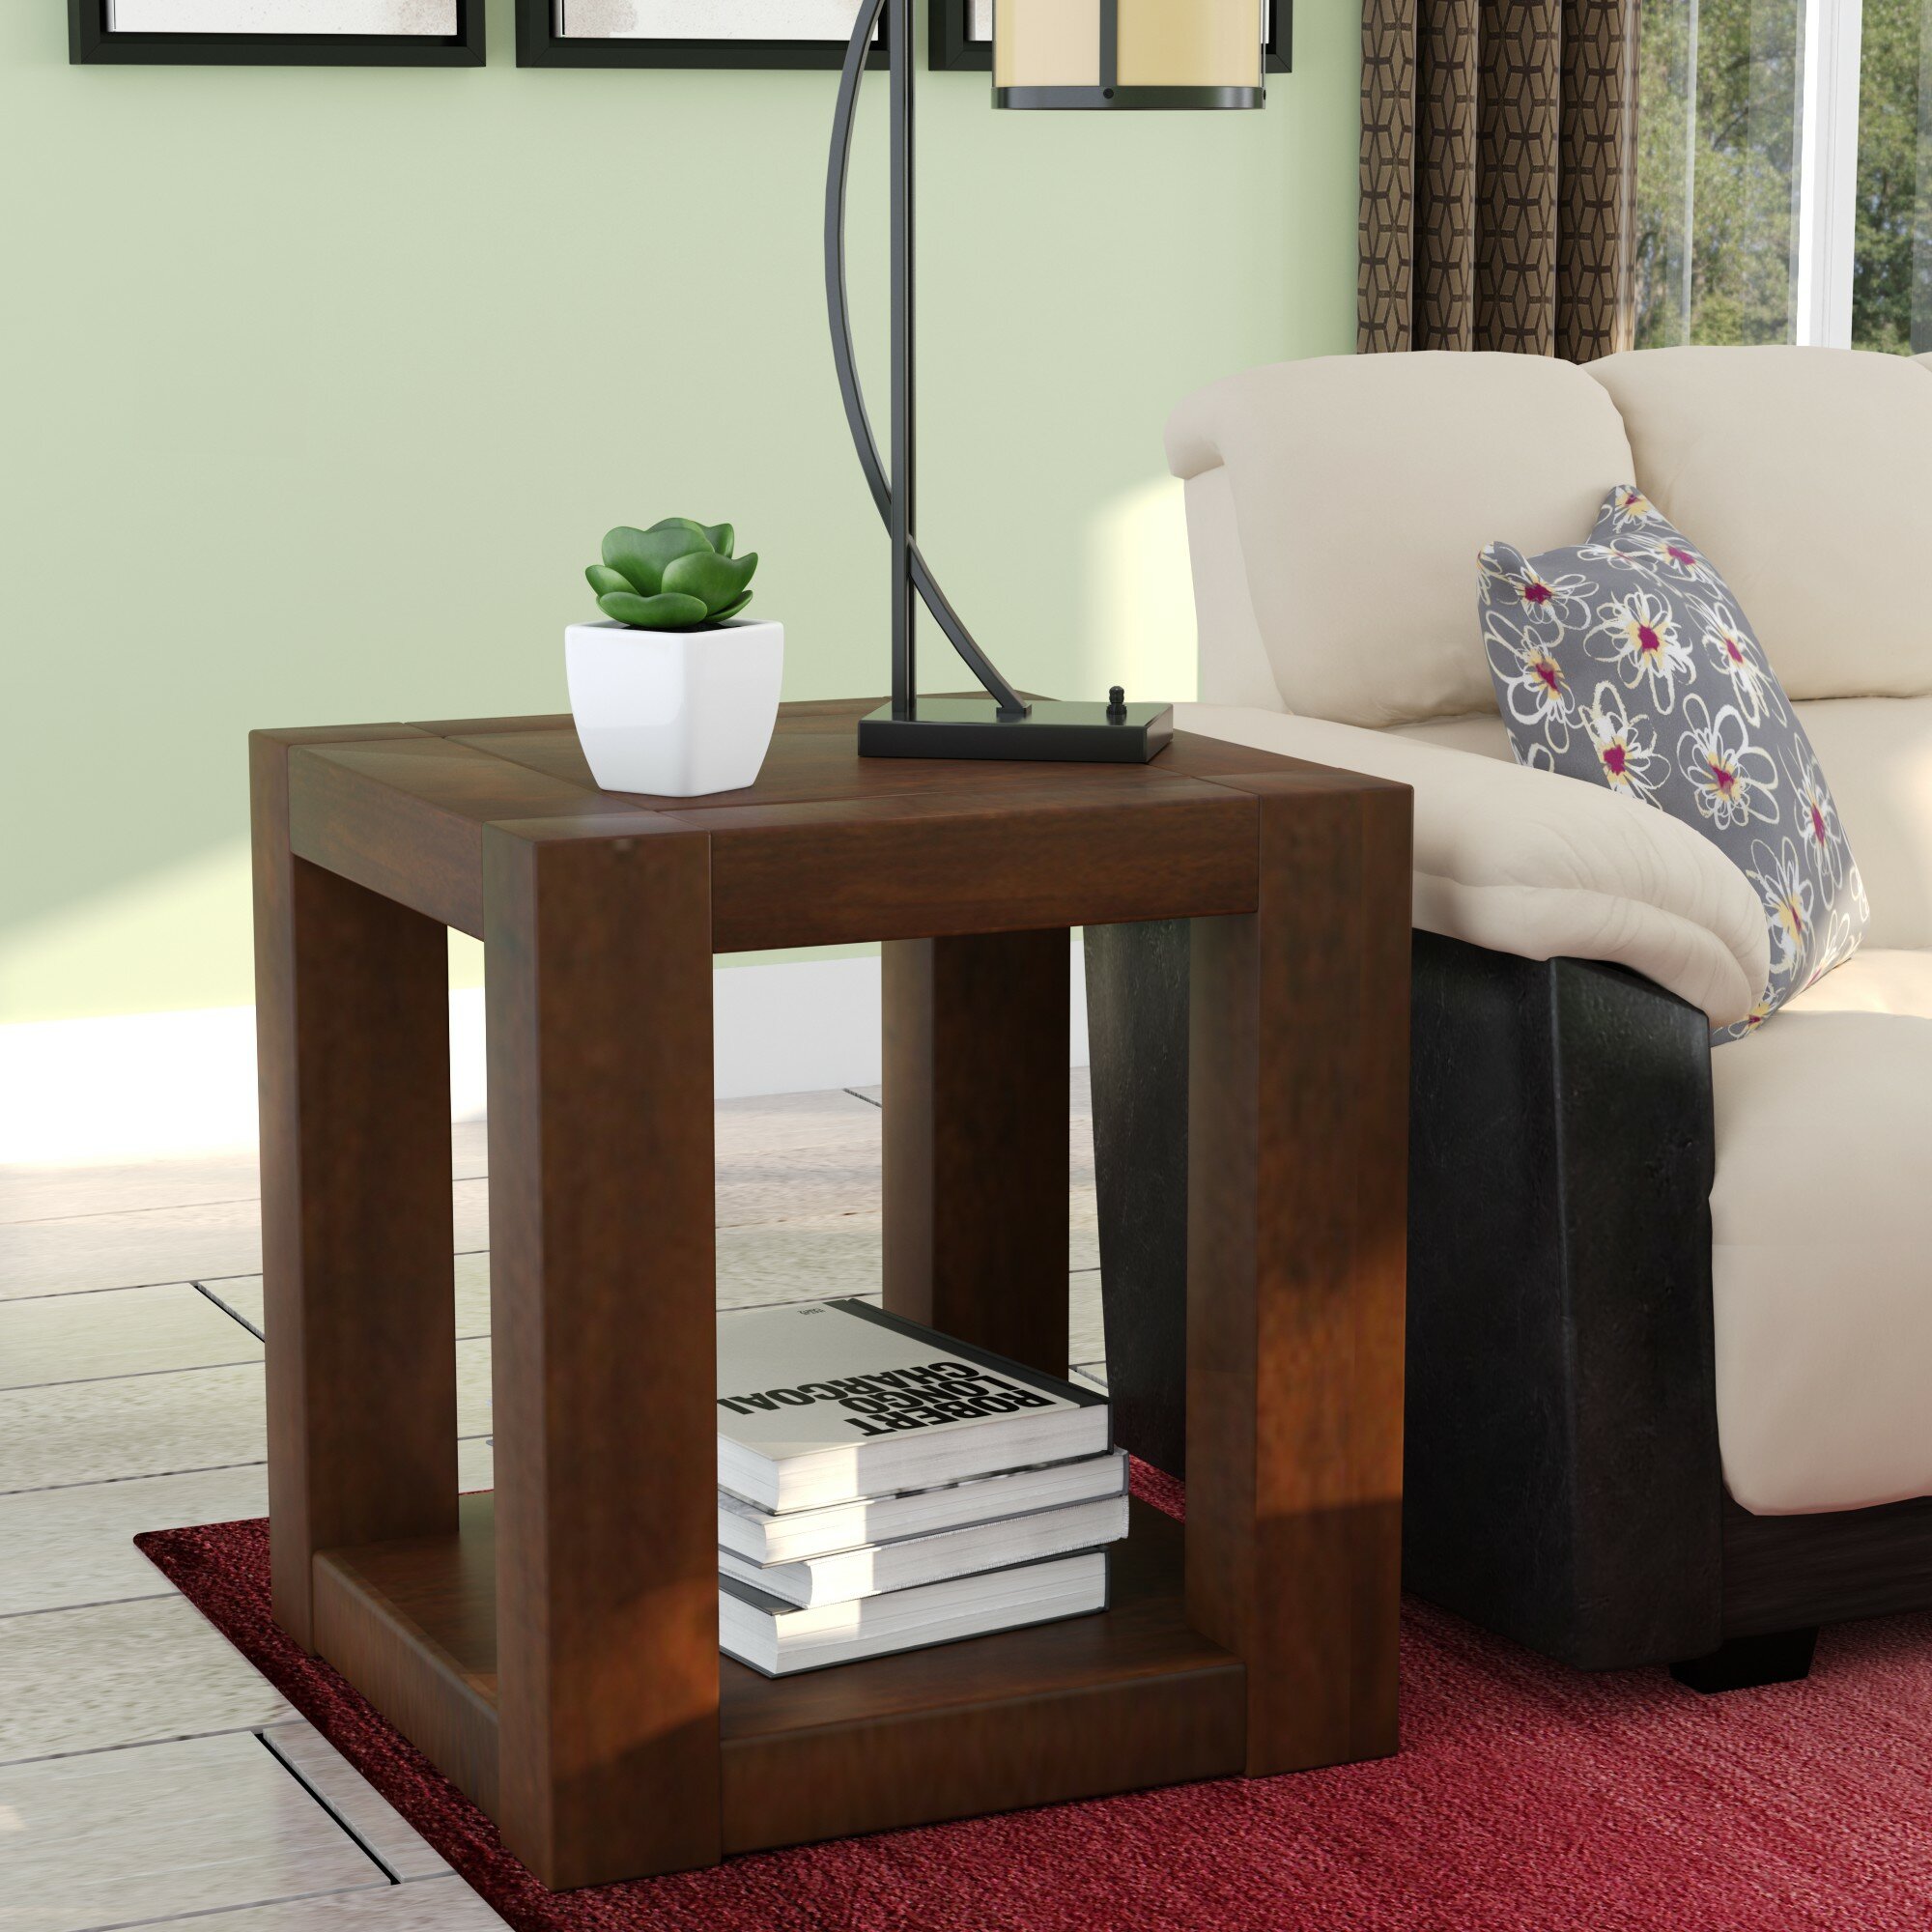 Simple Home End Table Living Room Decor Stand Shelf Rack With Drawer 